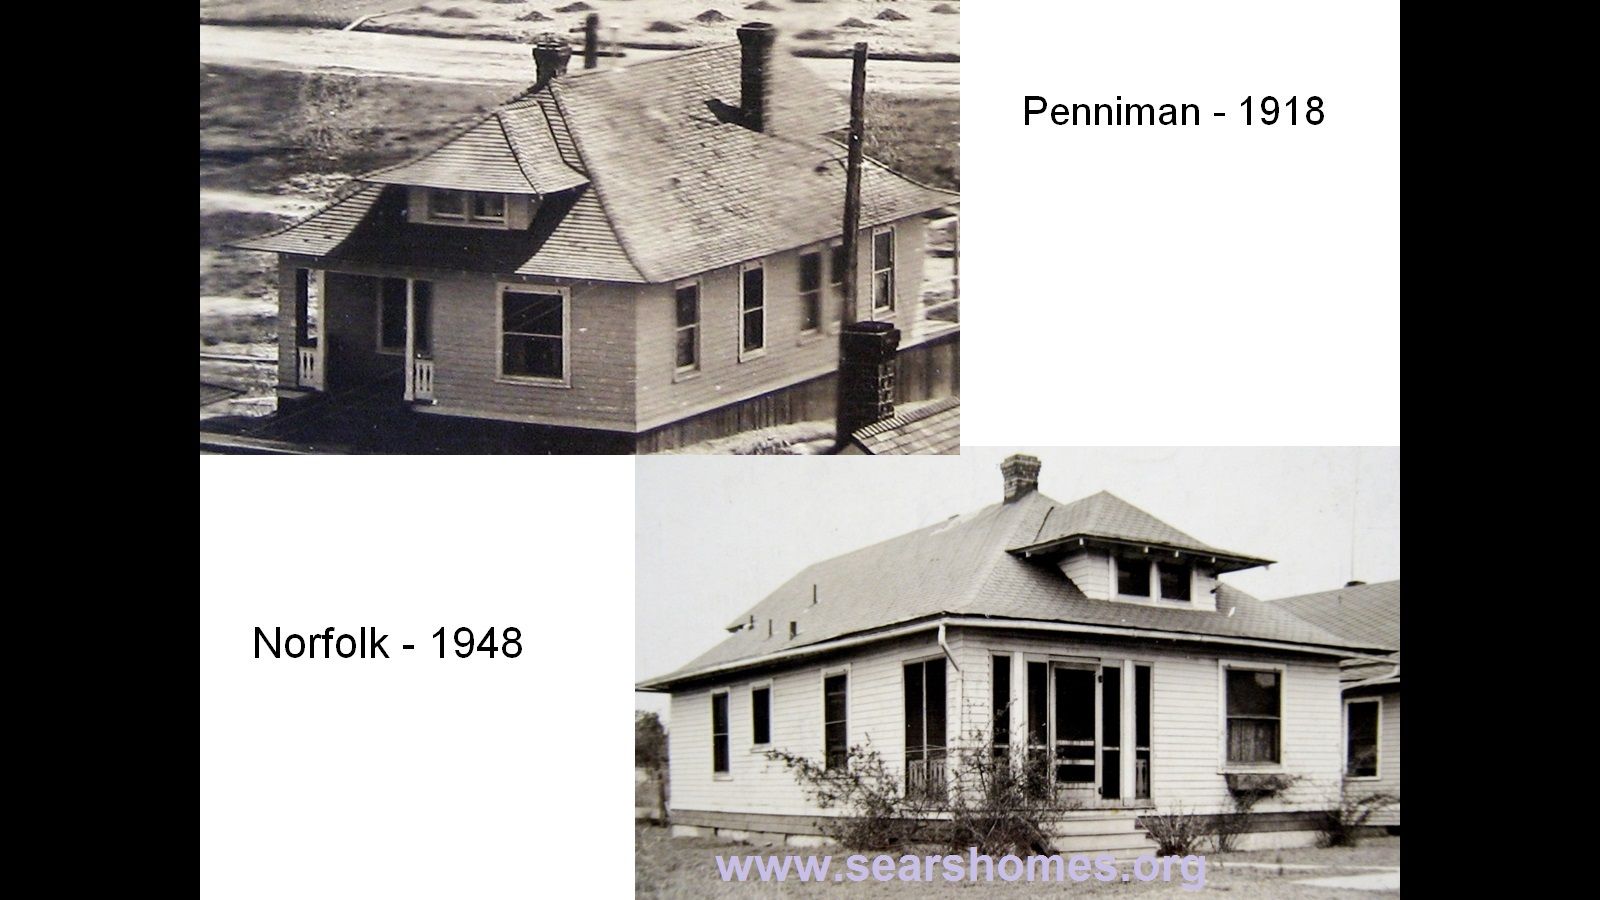 I became interested in Penniman in 2010, when I tried to figure out the true source of 17 bungalows in Riverview (Norfolk) that had been barged in - from somewhere.